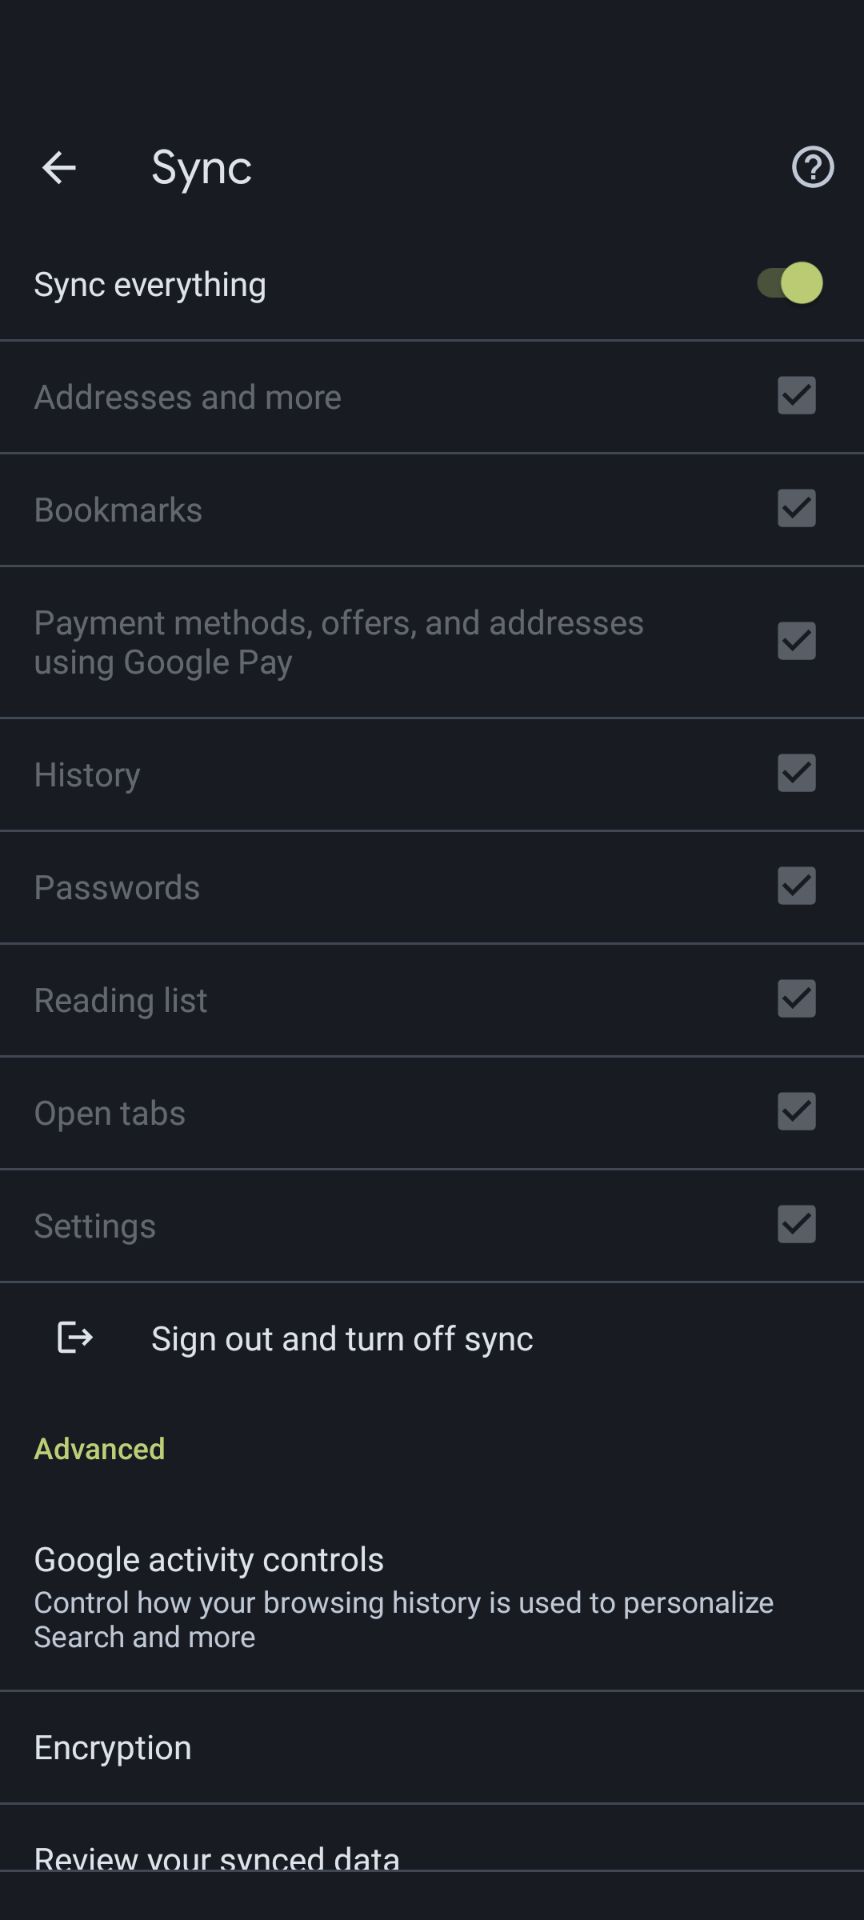 The Sync options in the Chrome mobile app